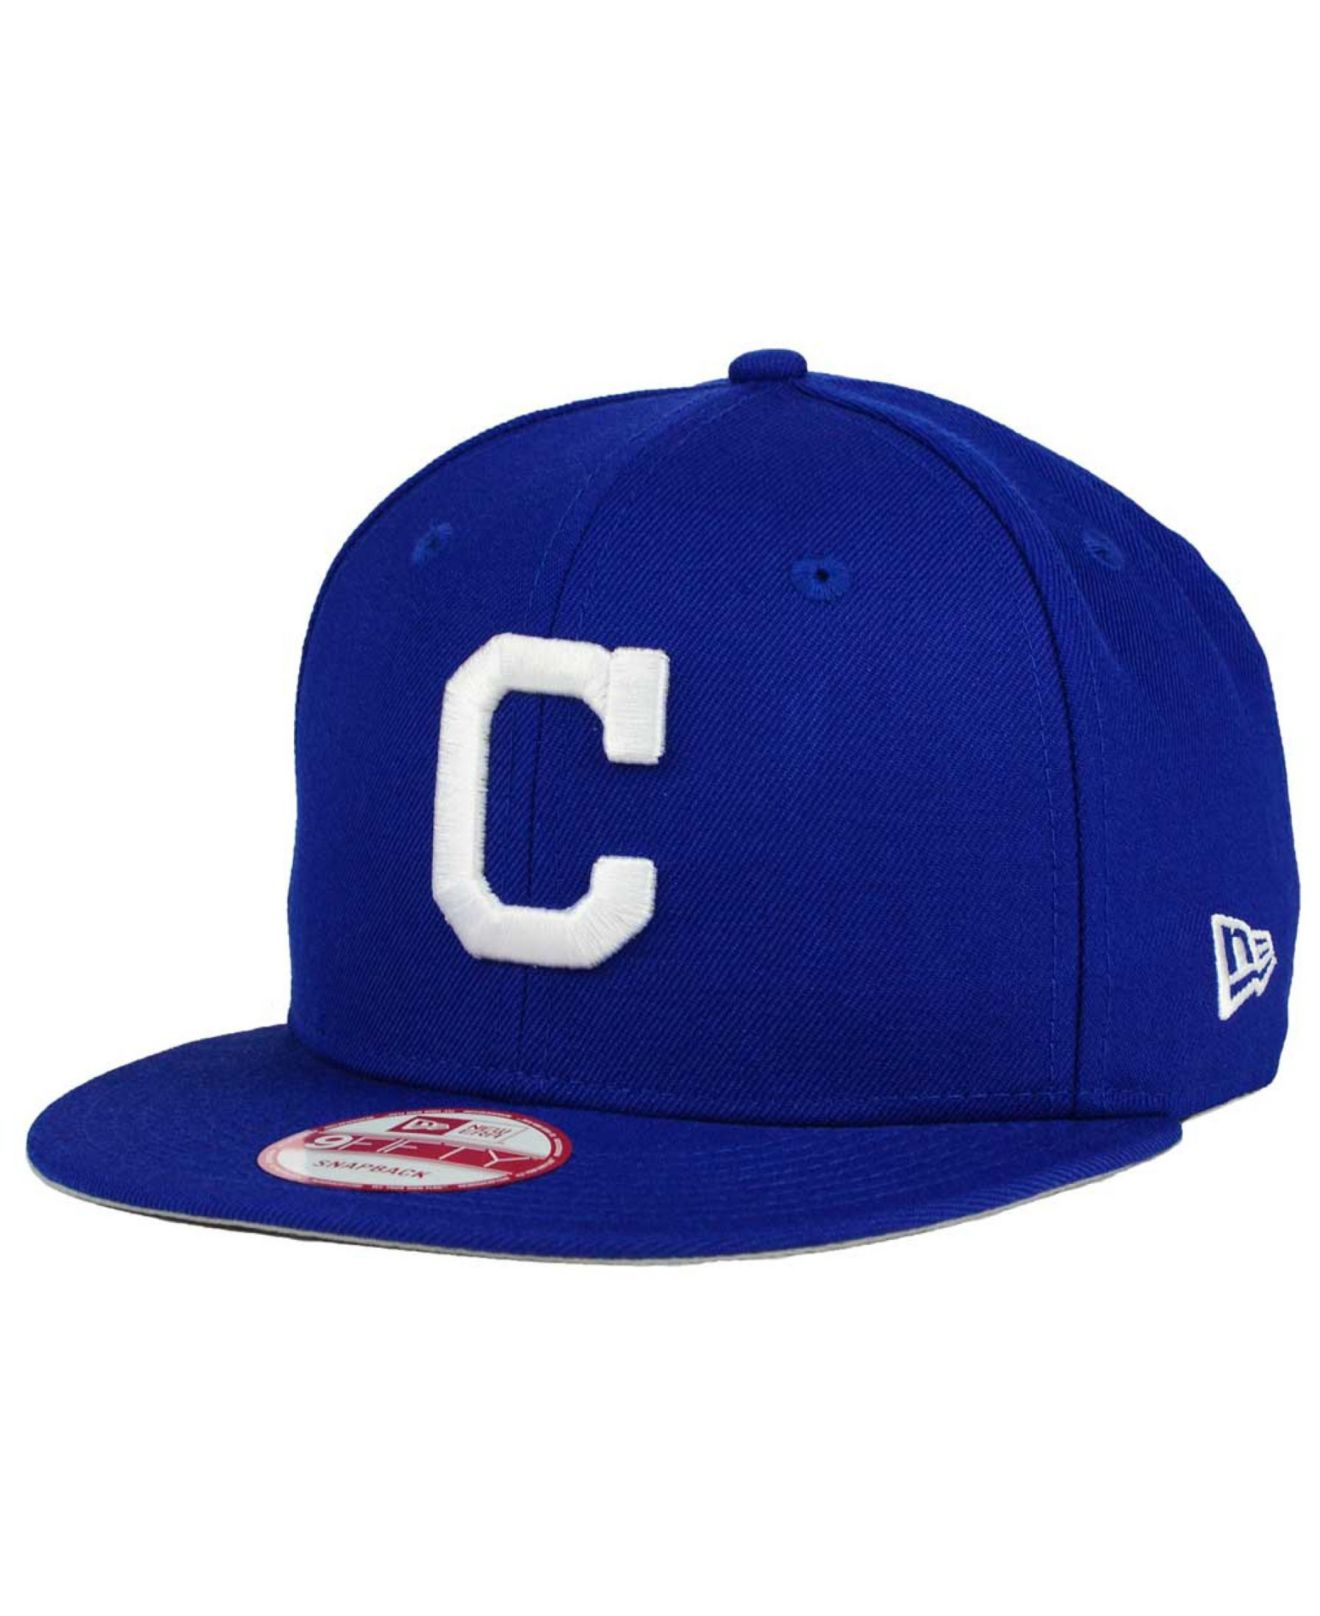 KTZ Cleveland Indians C-dub 9fifty Snapback Cap in Blue for Men